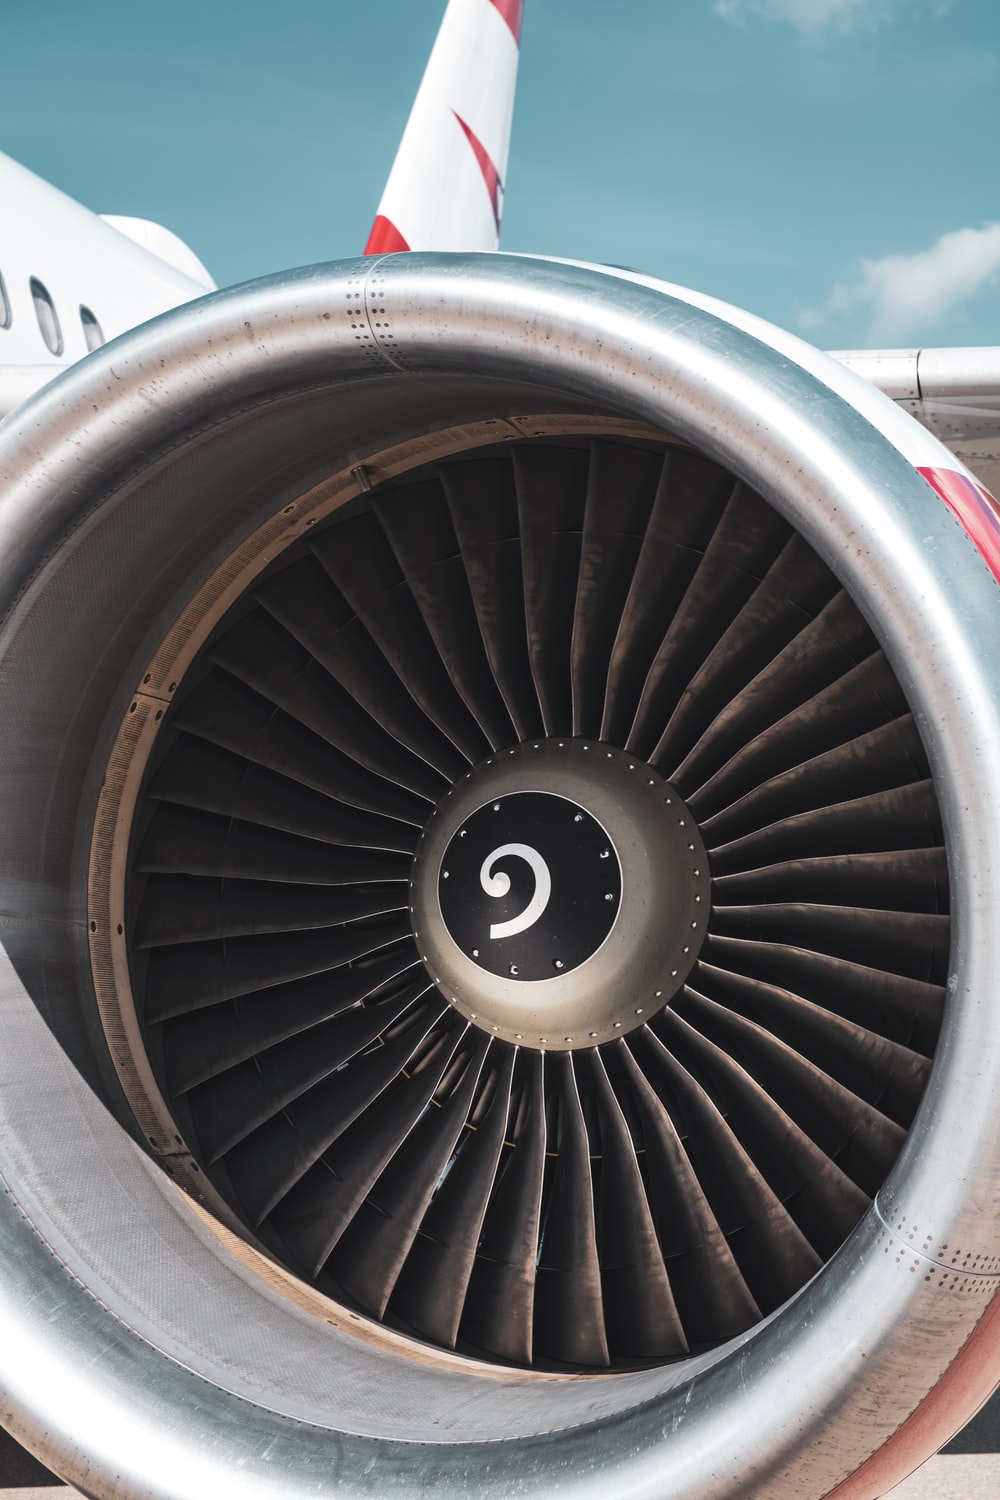 Plane Engine Picture. Download Free Image